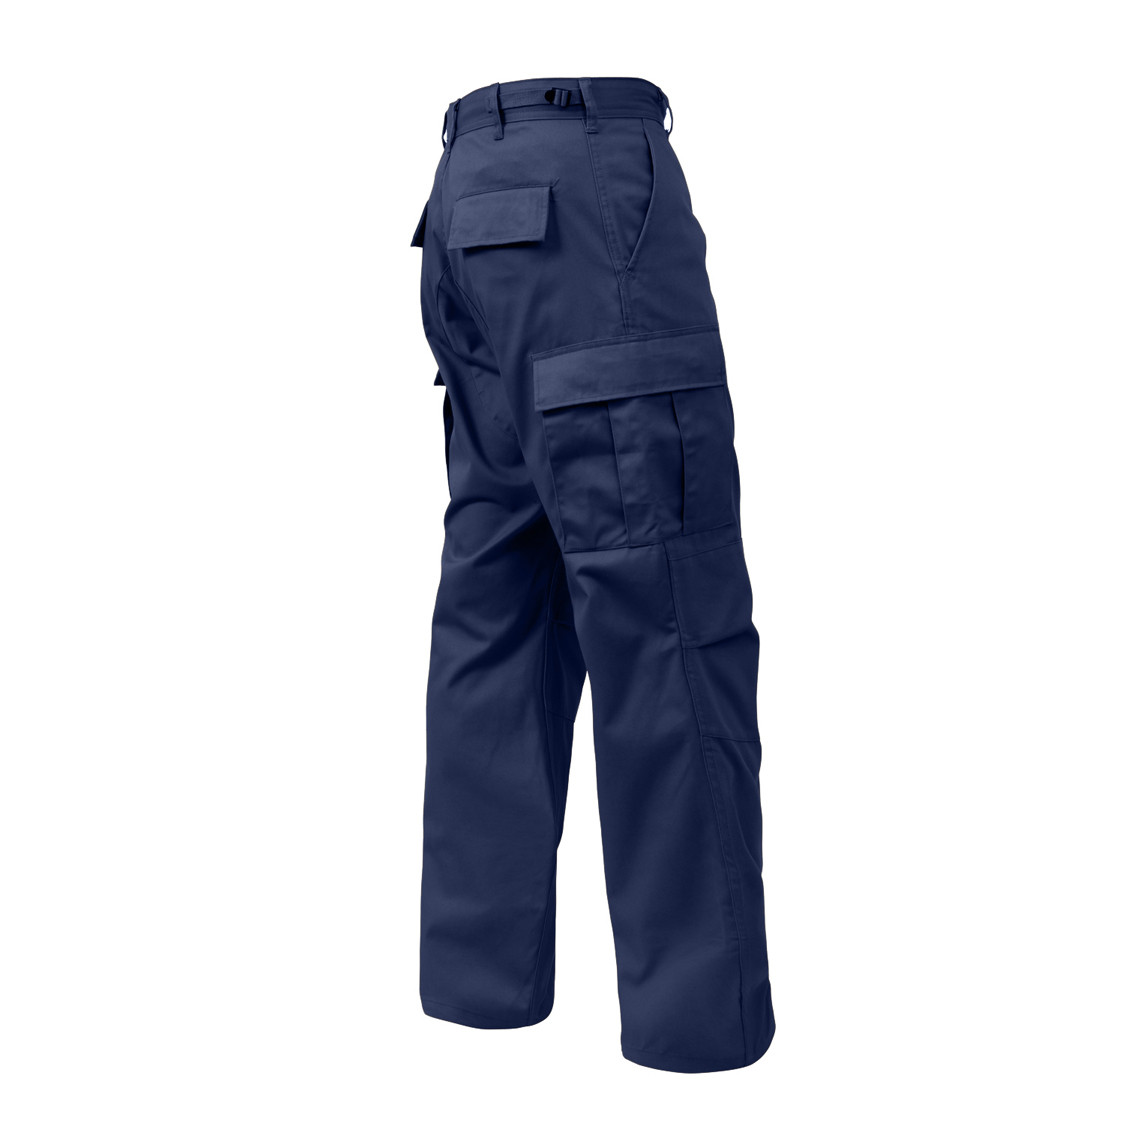 Shop Midnight Blue Tactical BDU Pants - Fatigues Army Navy Gear